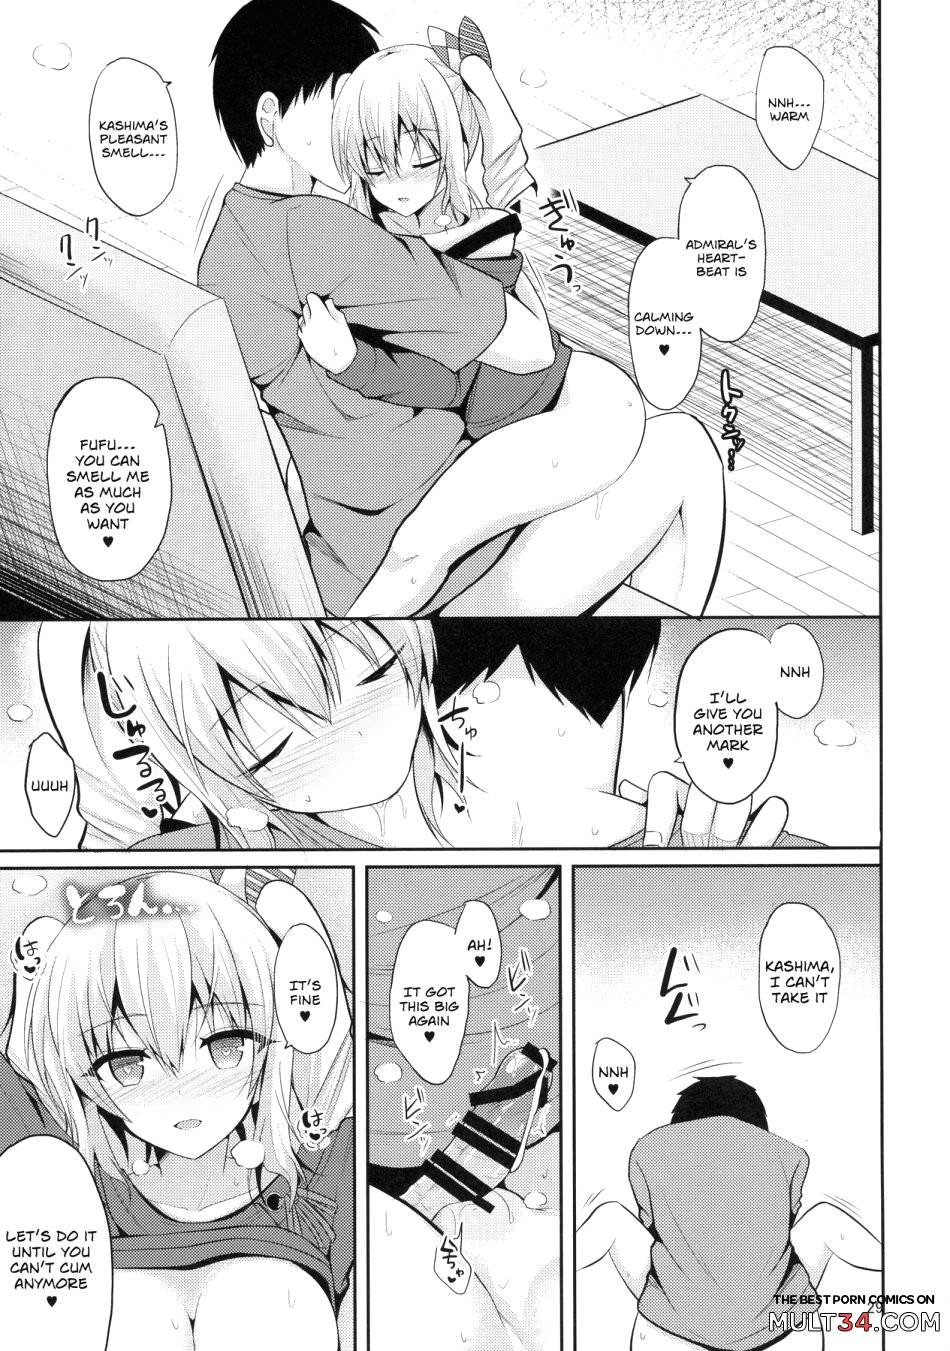 My Sexy Private Life with Kashima page 28